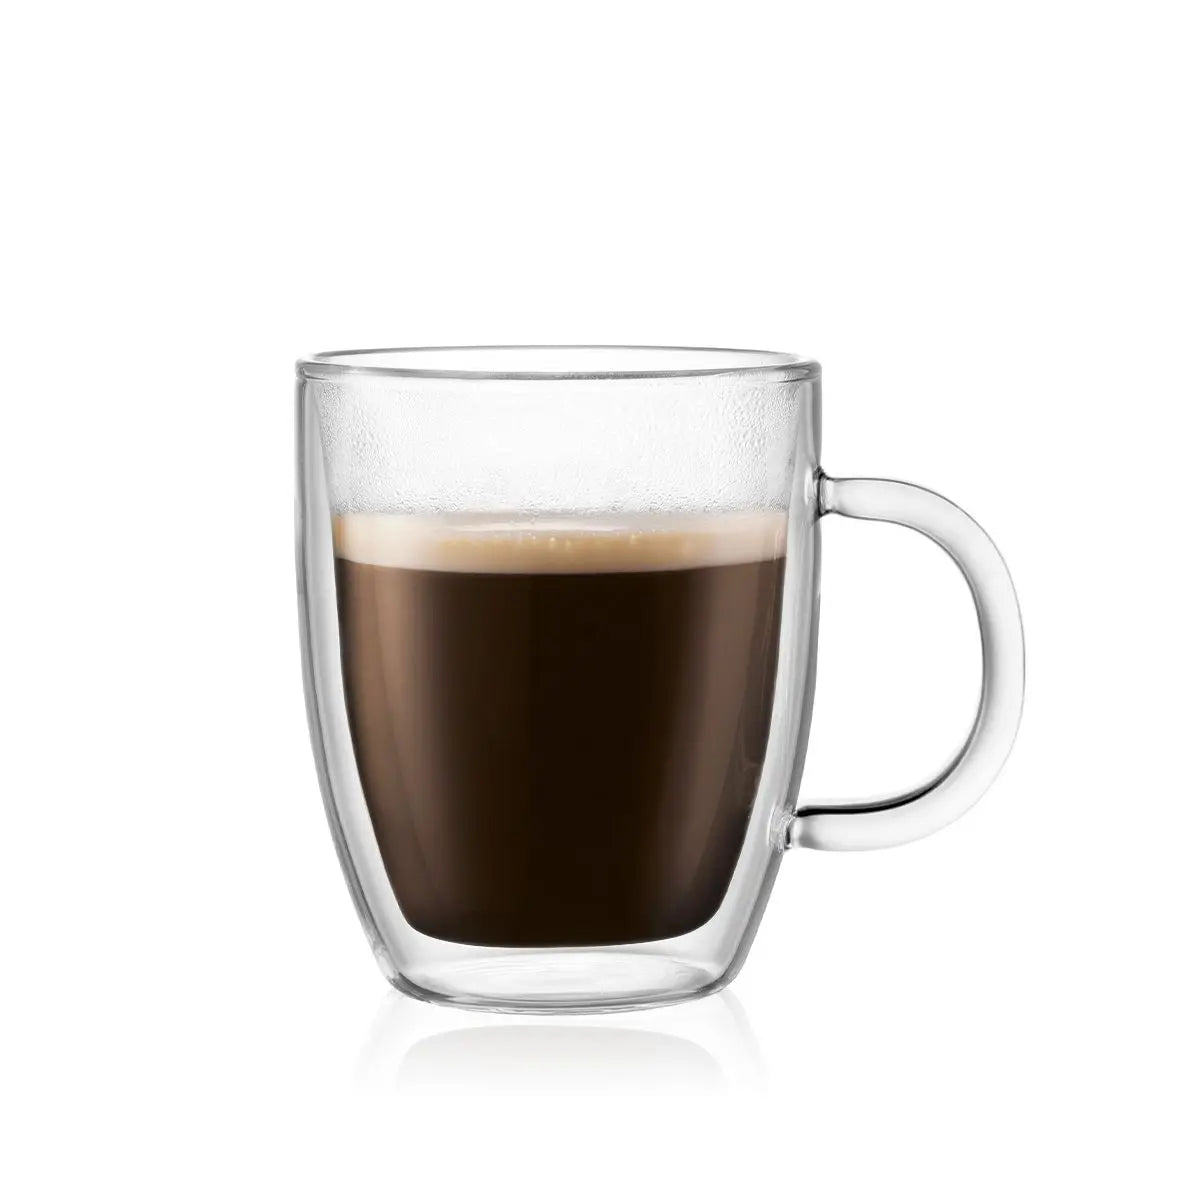 Bodum Bistro Double Wall Thermo-Glass Mugs (Set of 2) Coffee, Tea, Bar Browns Kitchen